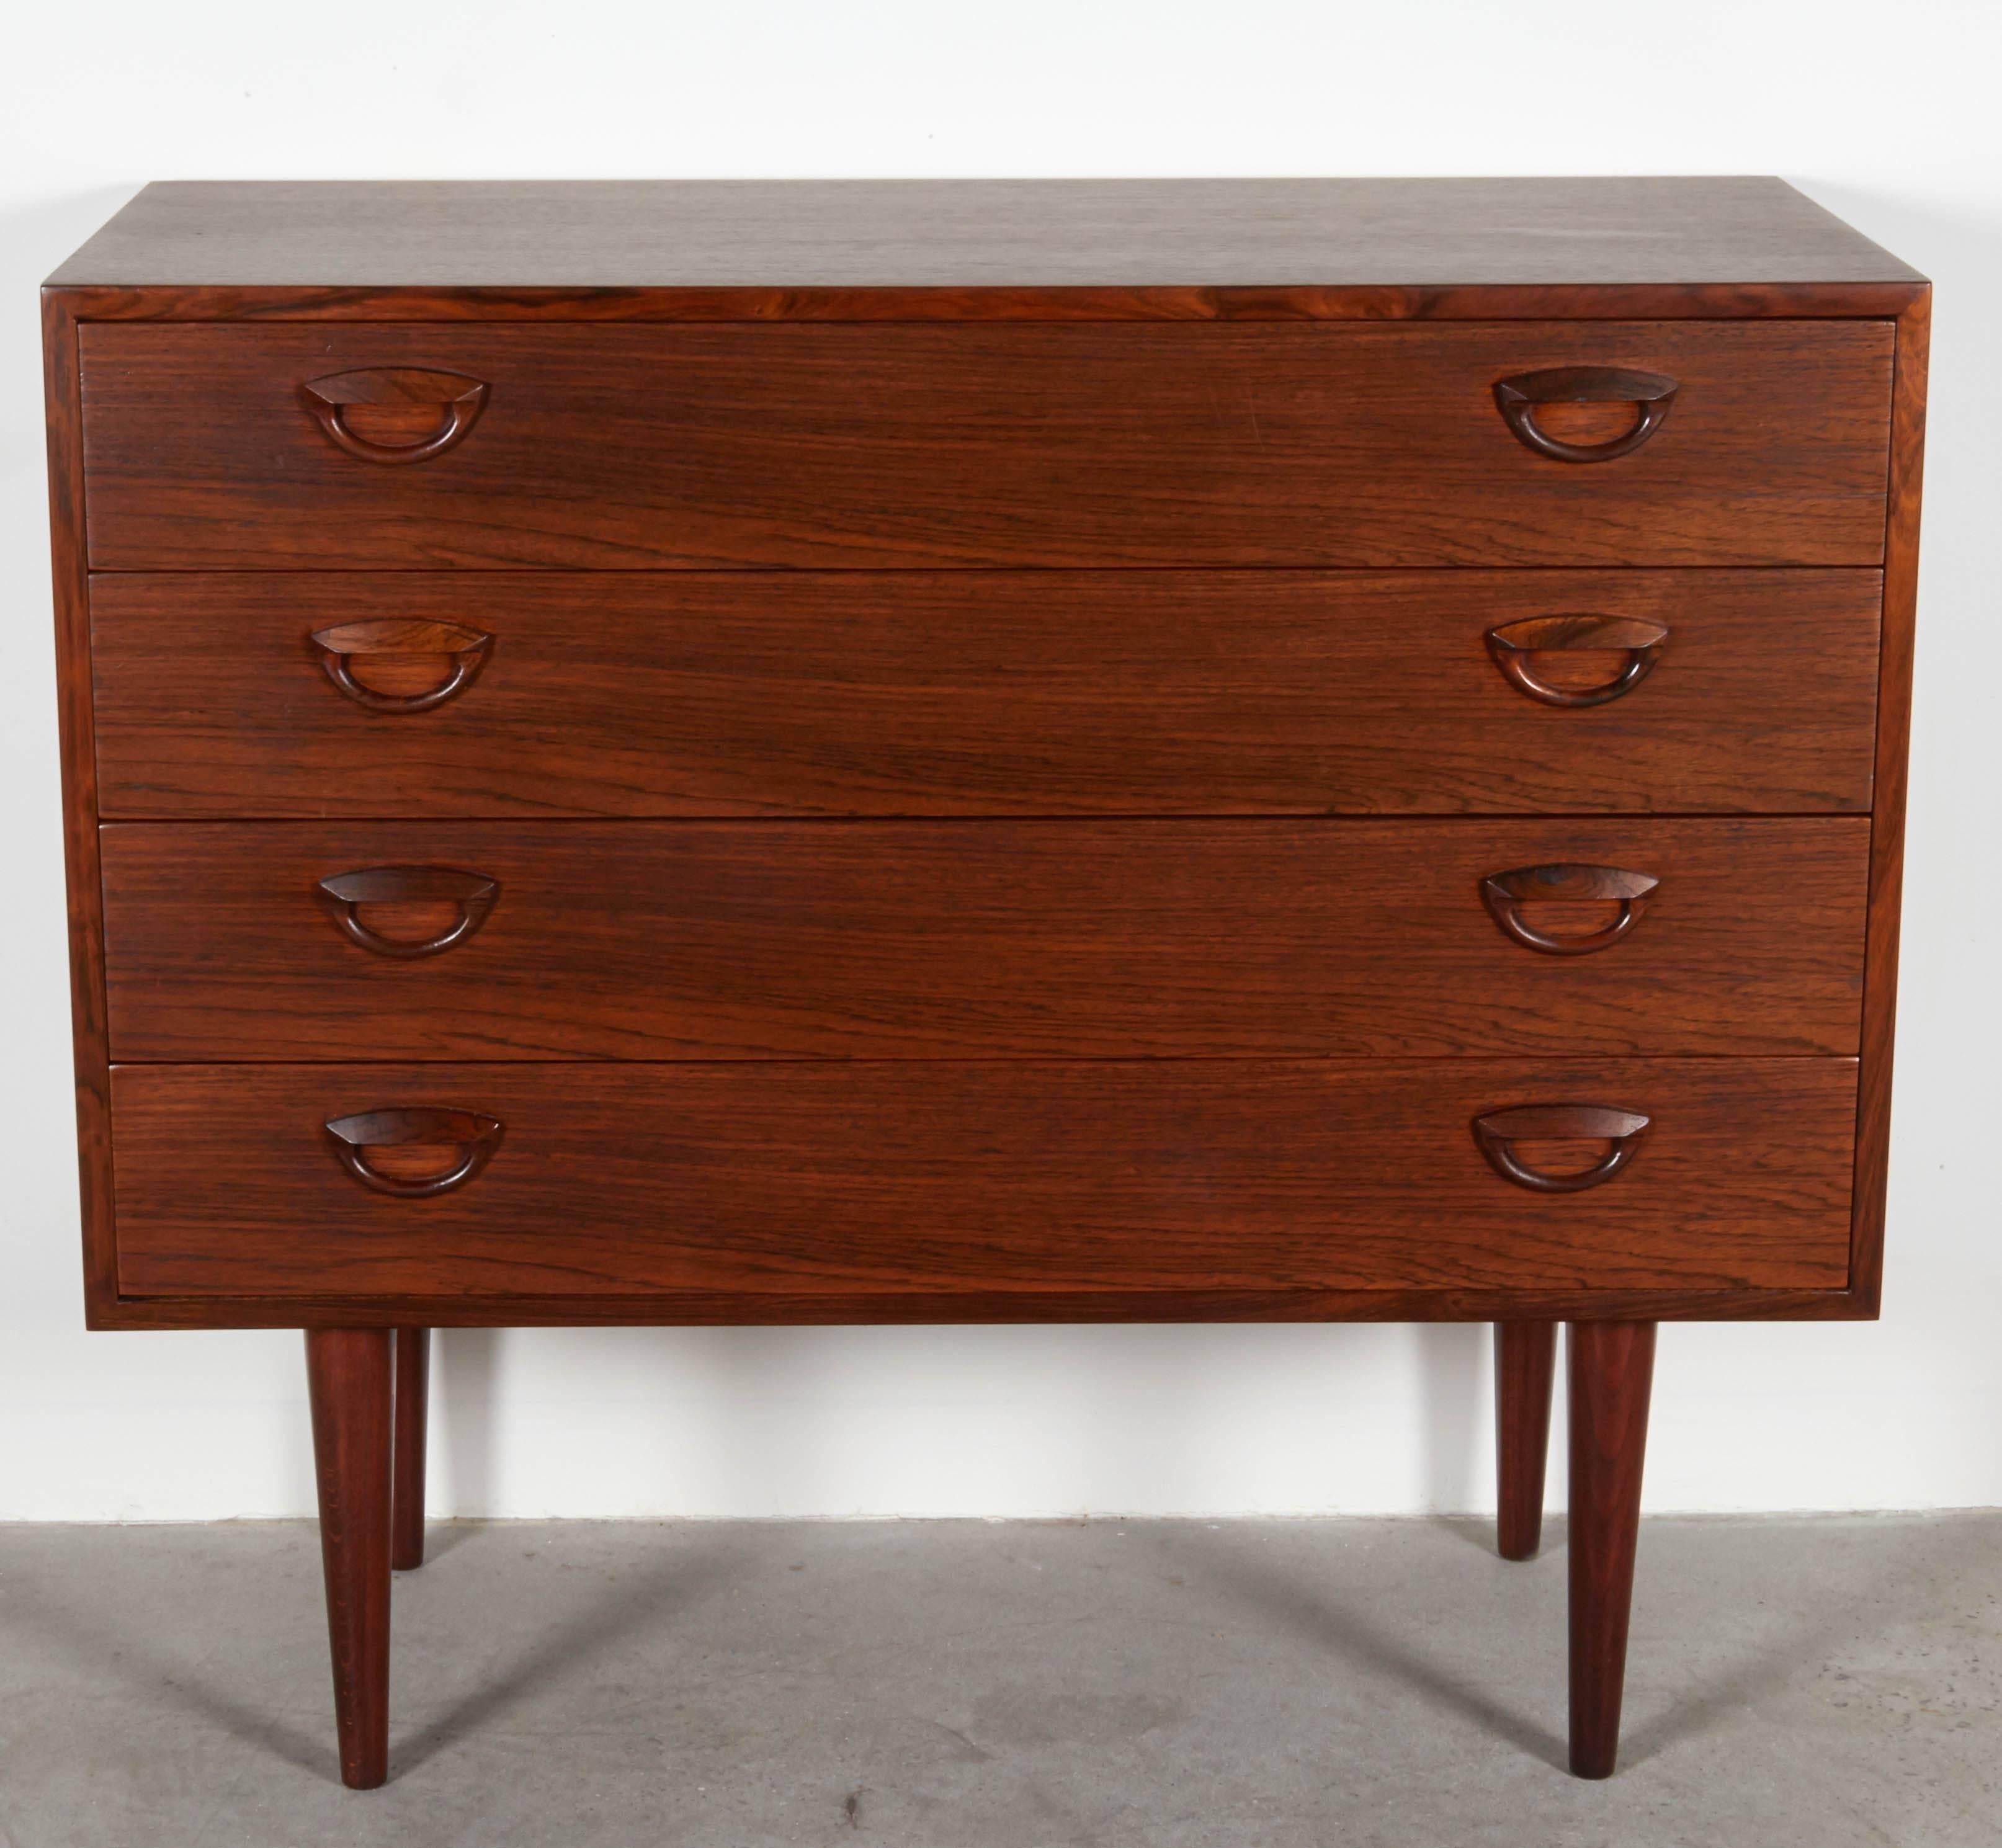 Vintage 1960s Chest of Drawers in Rosewood by Kai Kristiansen

This 4 drawer dresser is in like new condition. This chest works in many parts of the home as an extra dresser or large night stand in the bedroom. Great in the hallway or  entryway